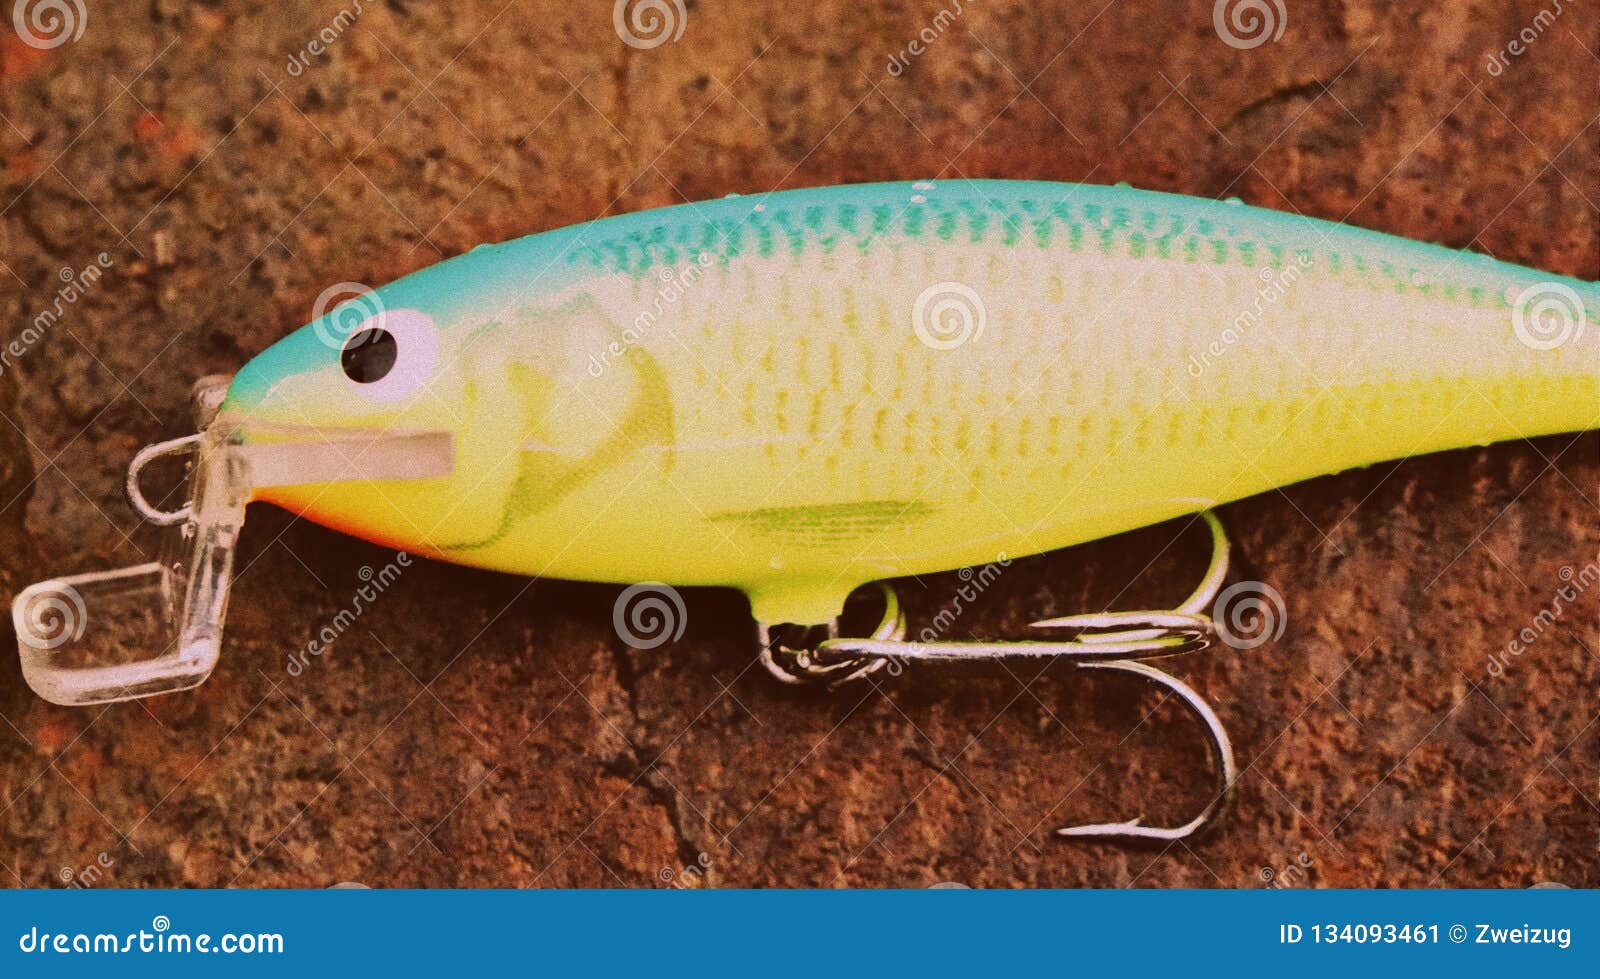 https://thumbs.dreamstime.com/z/detail-floating-home-made-fishing-lure-plug-fantastic-craftsmanship-s-white-makes-lures-to-stand-out-others-134093461.jpg